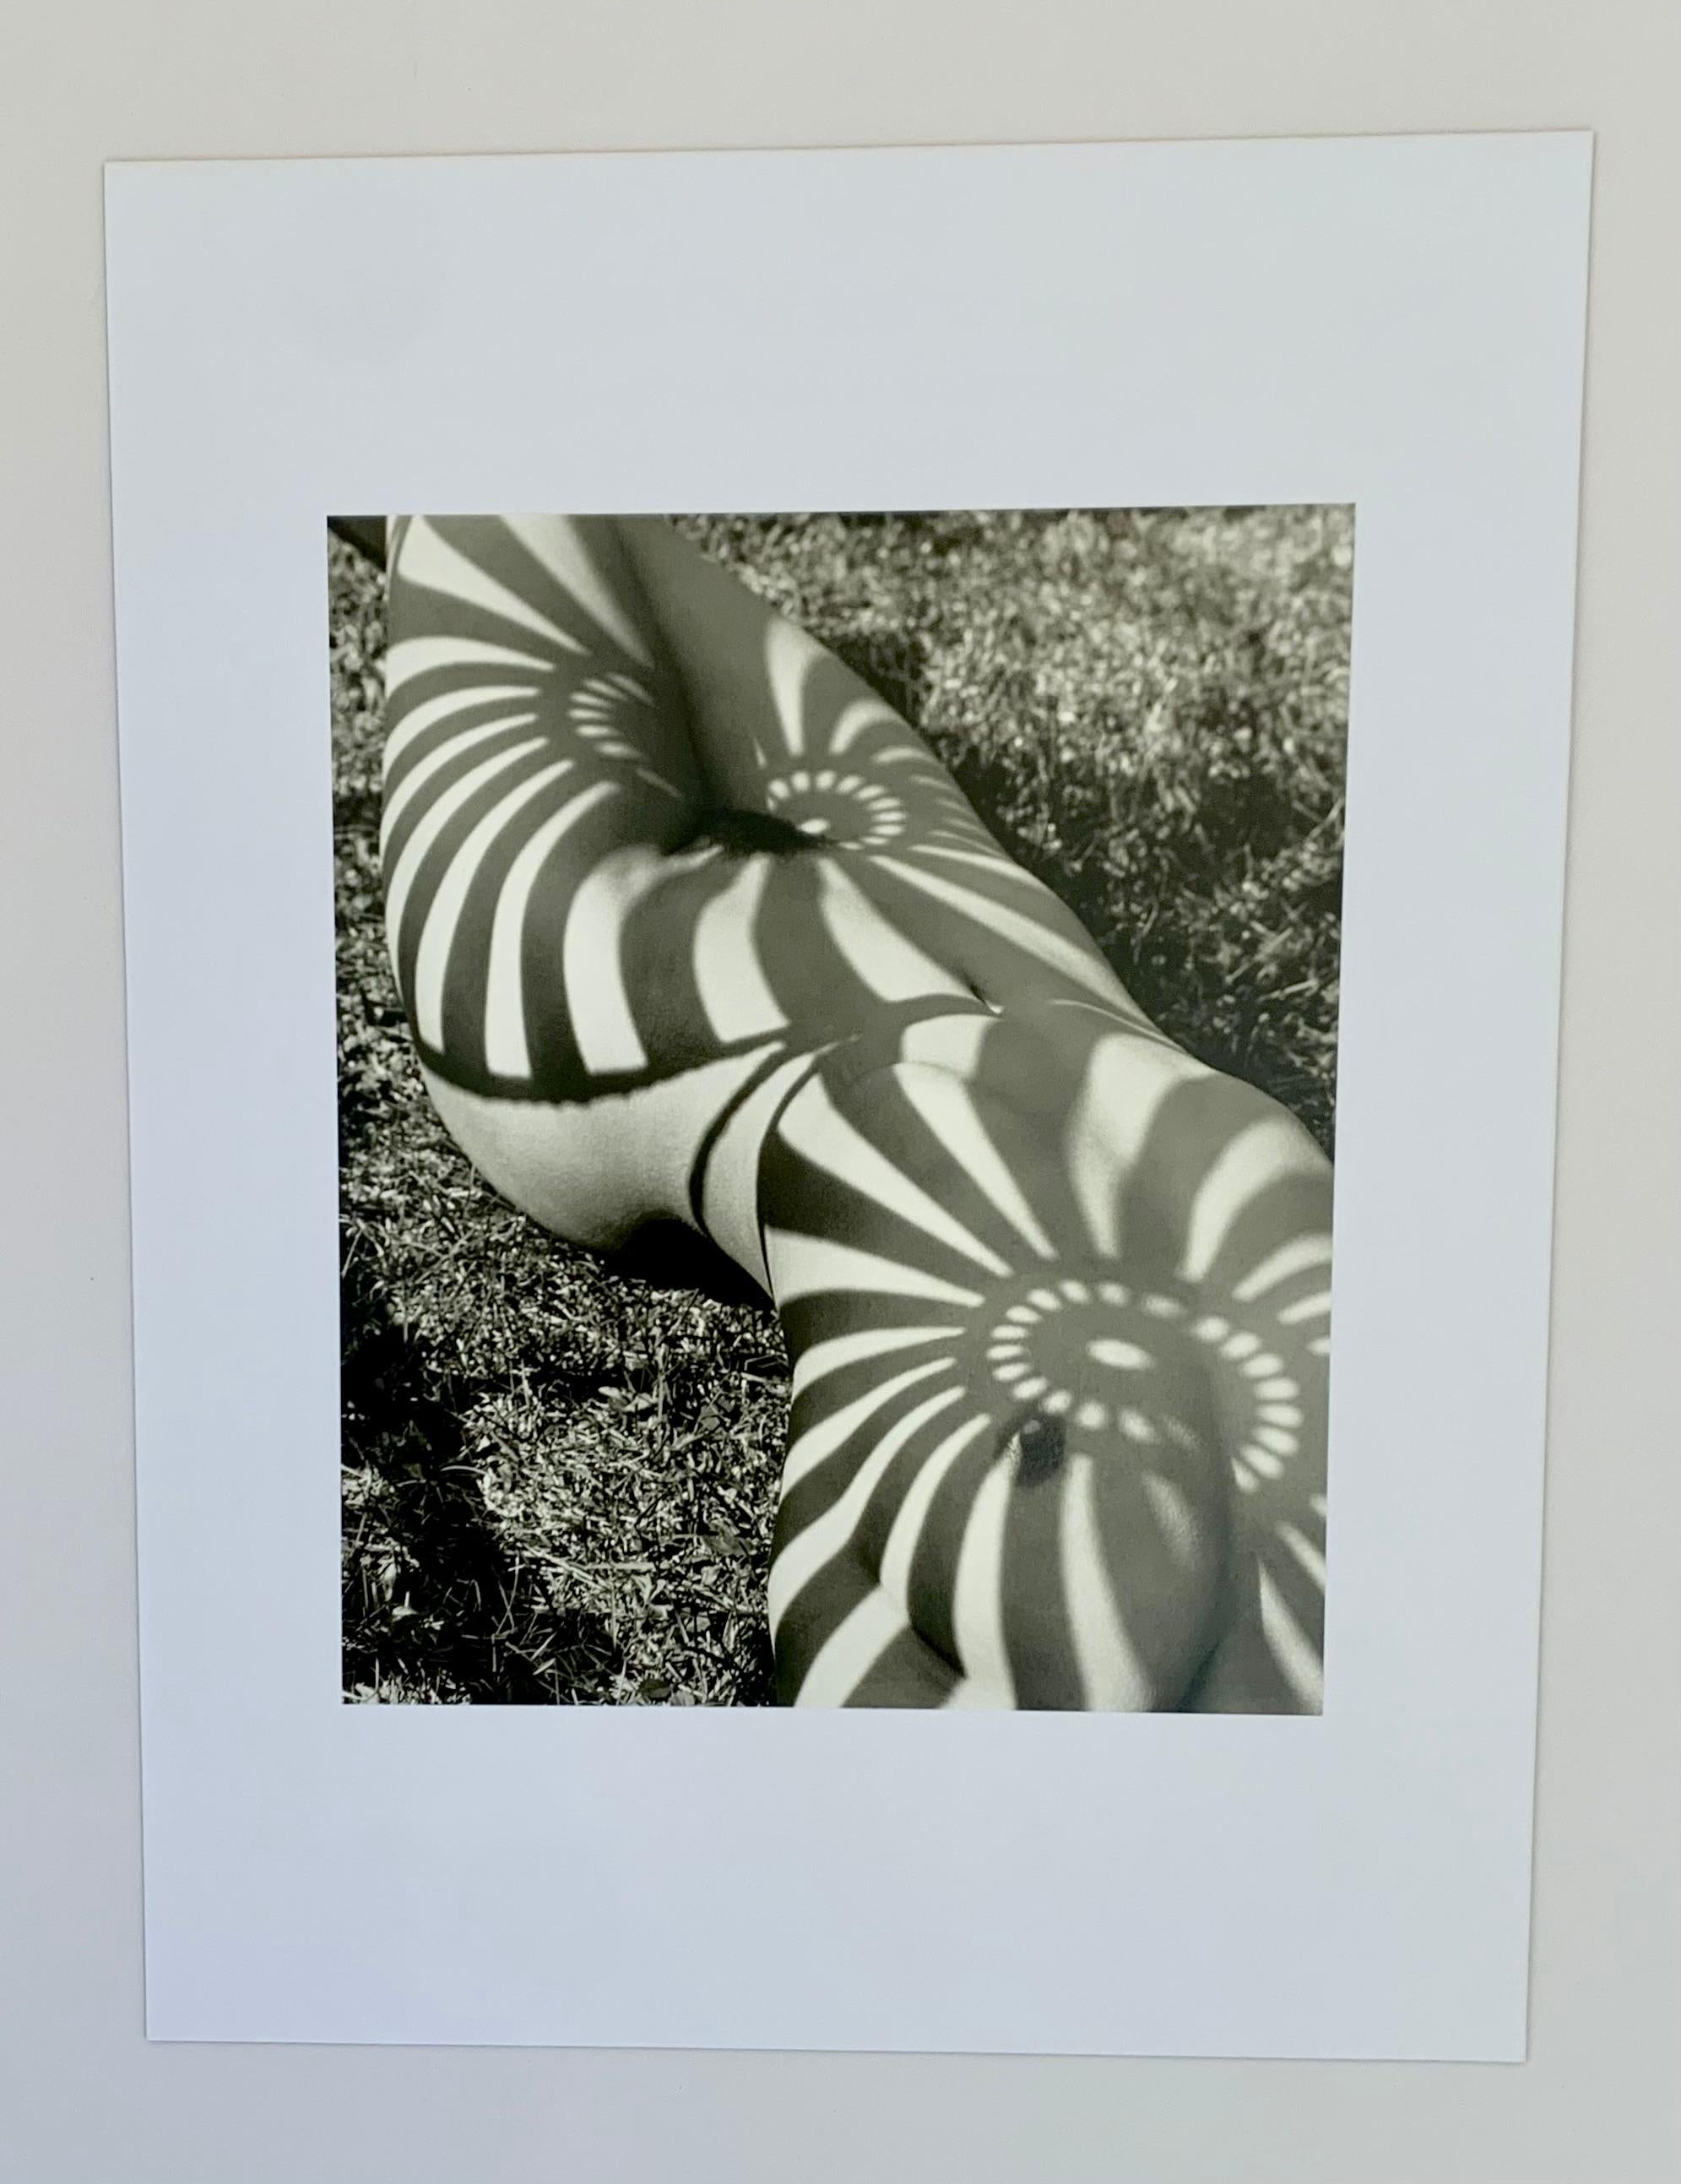 Neith with Shadows, Pound Ridge 1985
by Herb Ritts

A stunning shot of a nude female, Neith, laying beneath spiral shadows.

Unframed
Matted
Overall size : 12 x 16